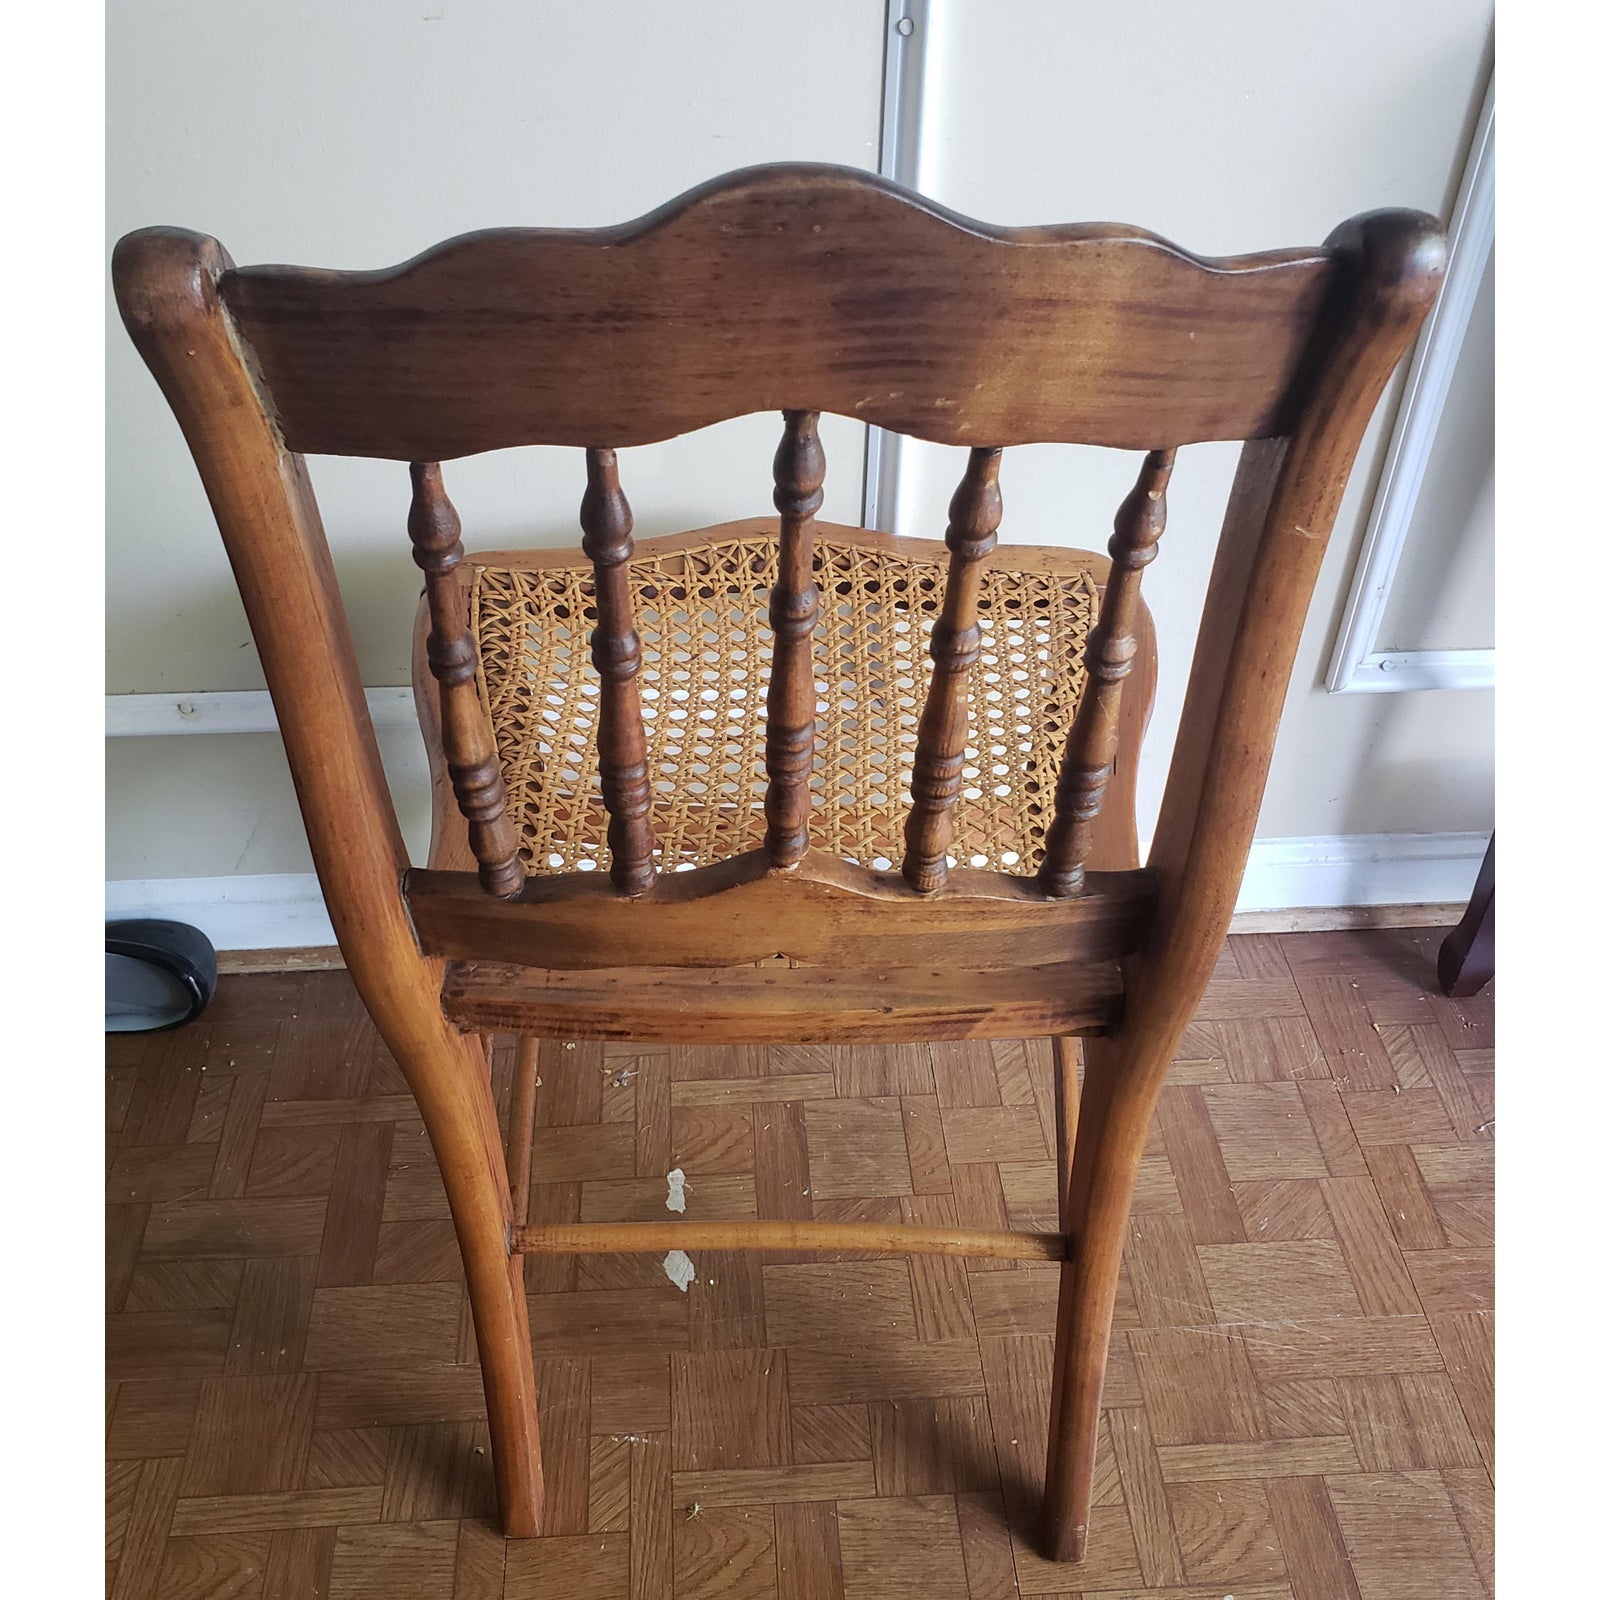 Mid 19th Century Maple Spindle Back Caned Seat Chair In Good Condition For Sale In Germantown, MD